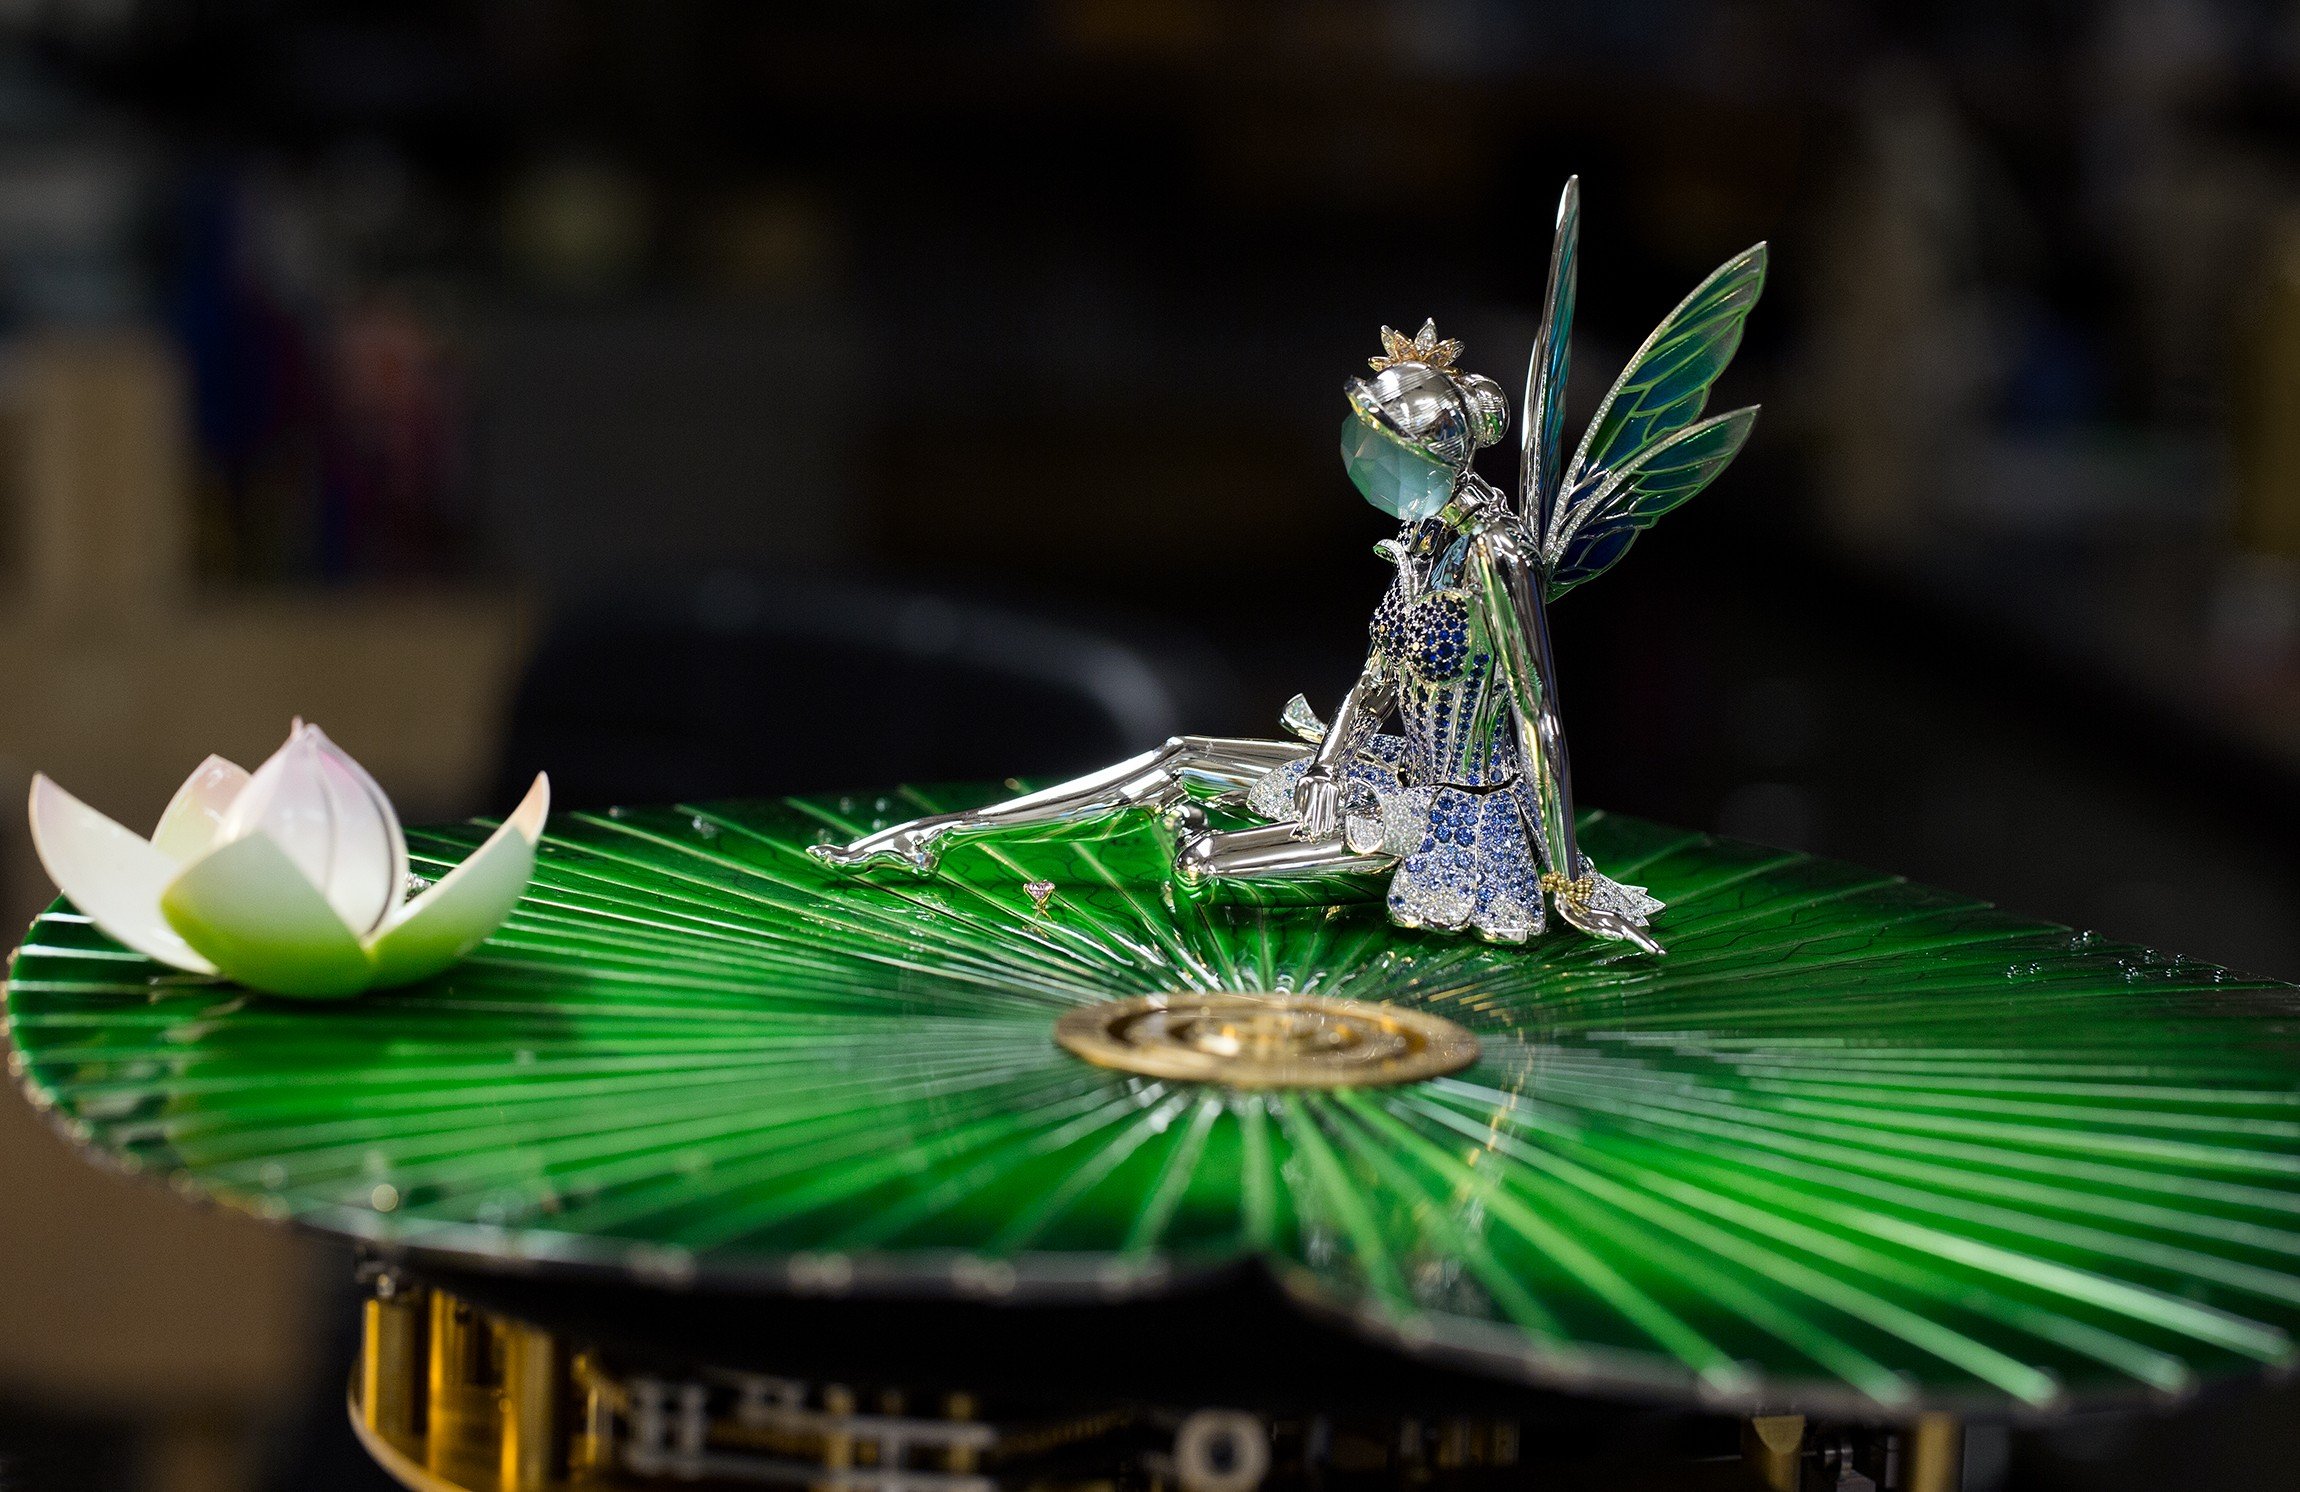 The automaton of Van Cleef & Arpels' Fee Ondine clock took eight years to develop.